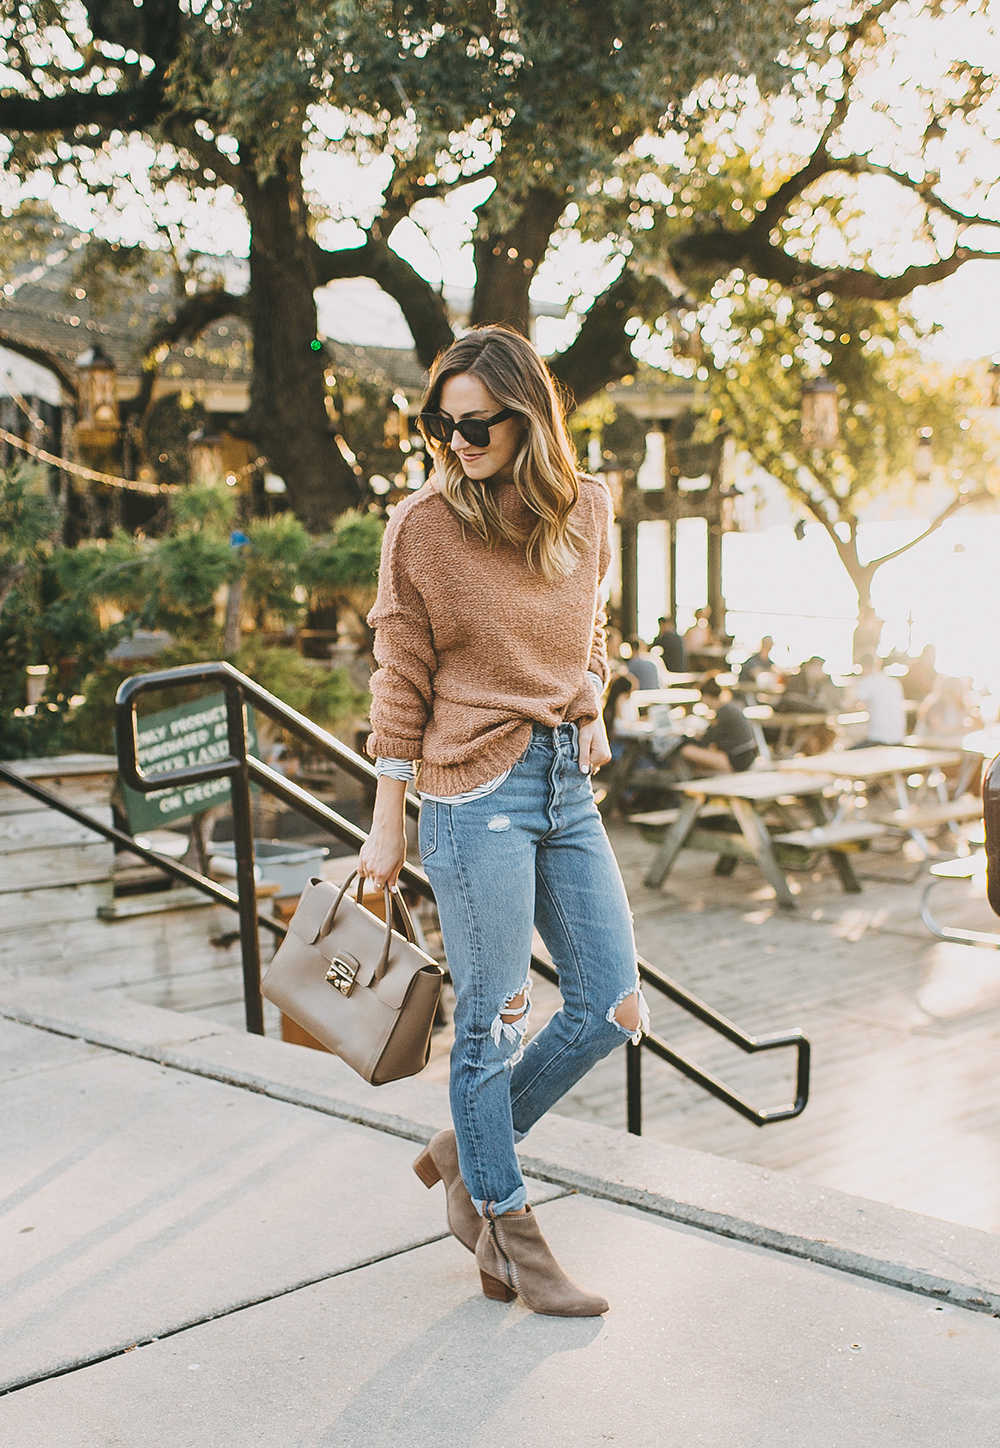 livvyland-blog-olivia-watson-mozarts-coffee-roasters-striped-tee-marsala-clay-chunky-knit-sweater-levis-501-jeans-outfit-4